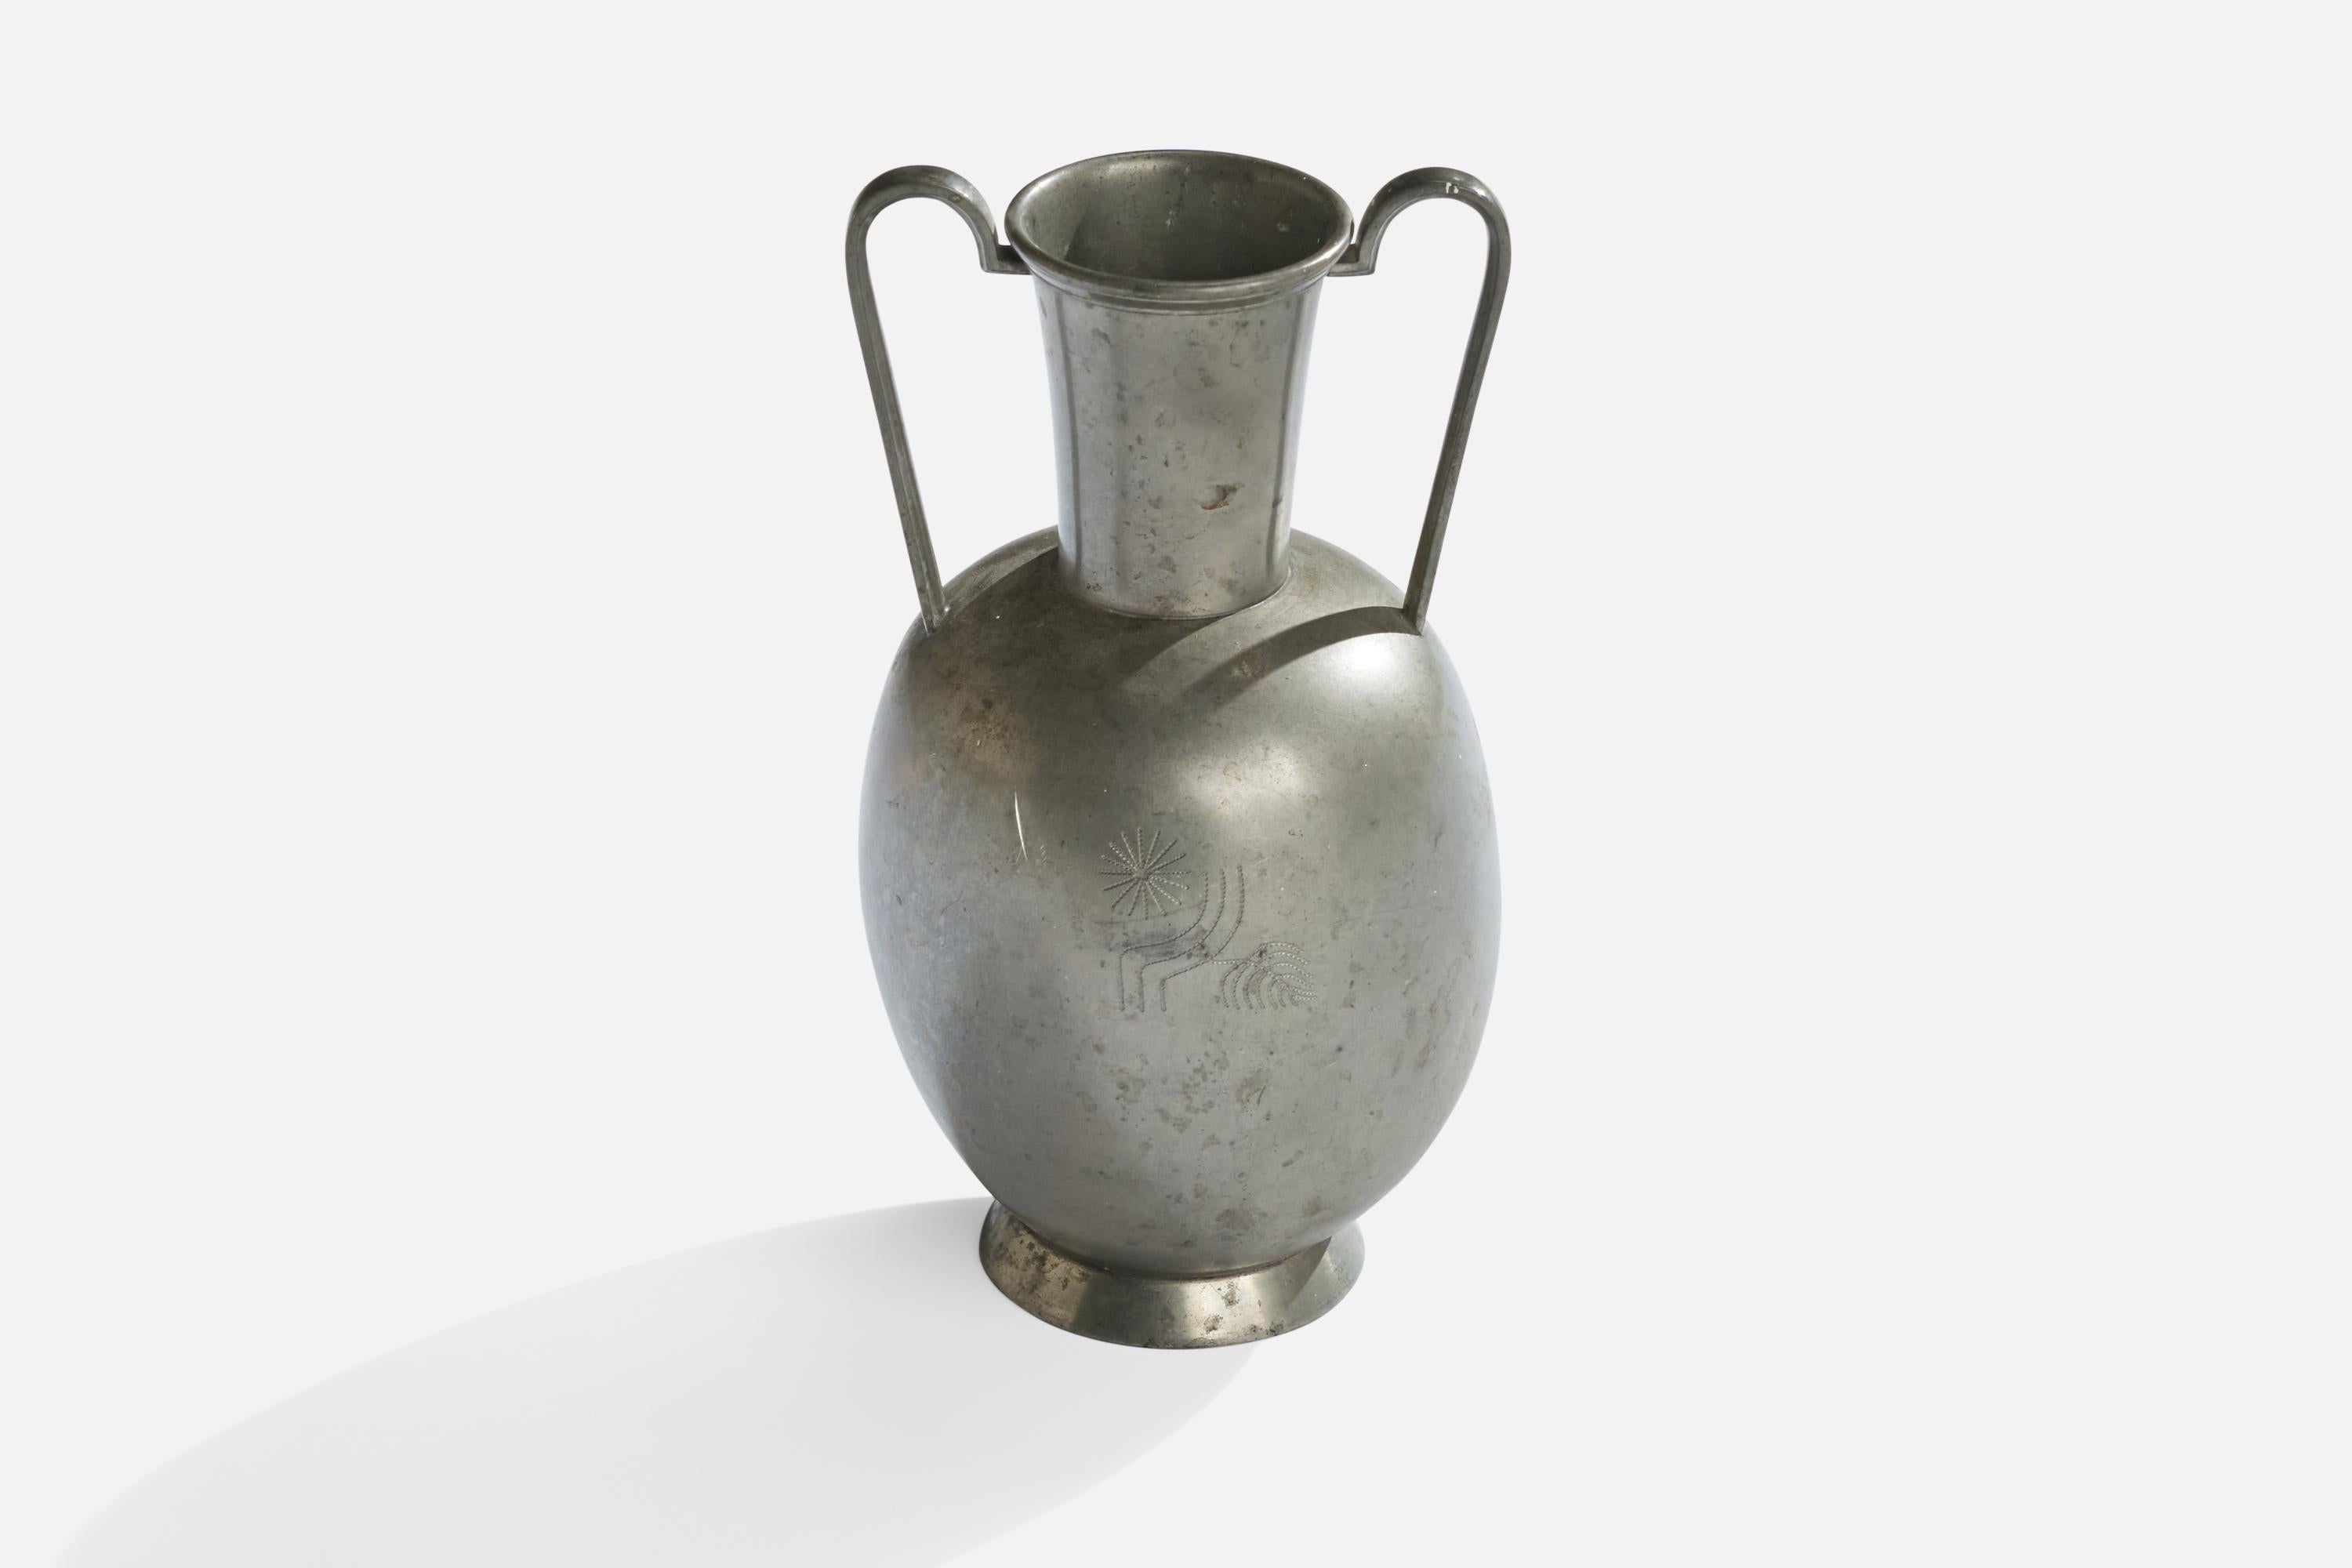 A pewter vase designed and produced in Sweden, 1935. 

With text and decorative engraving.